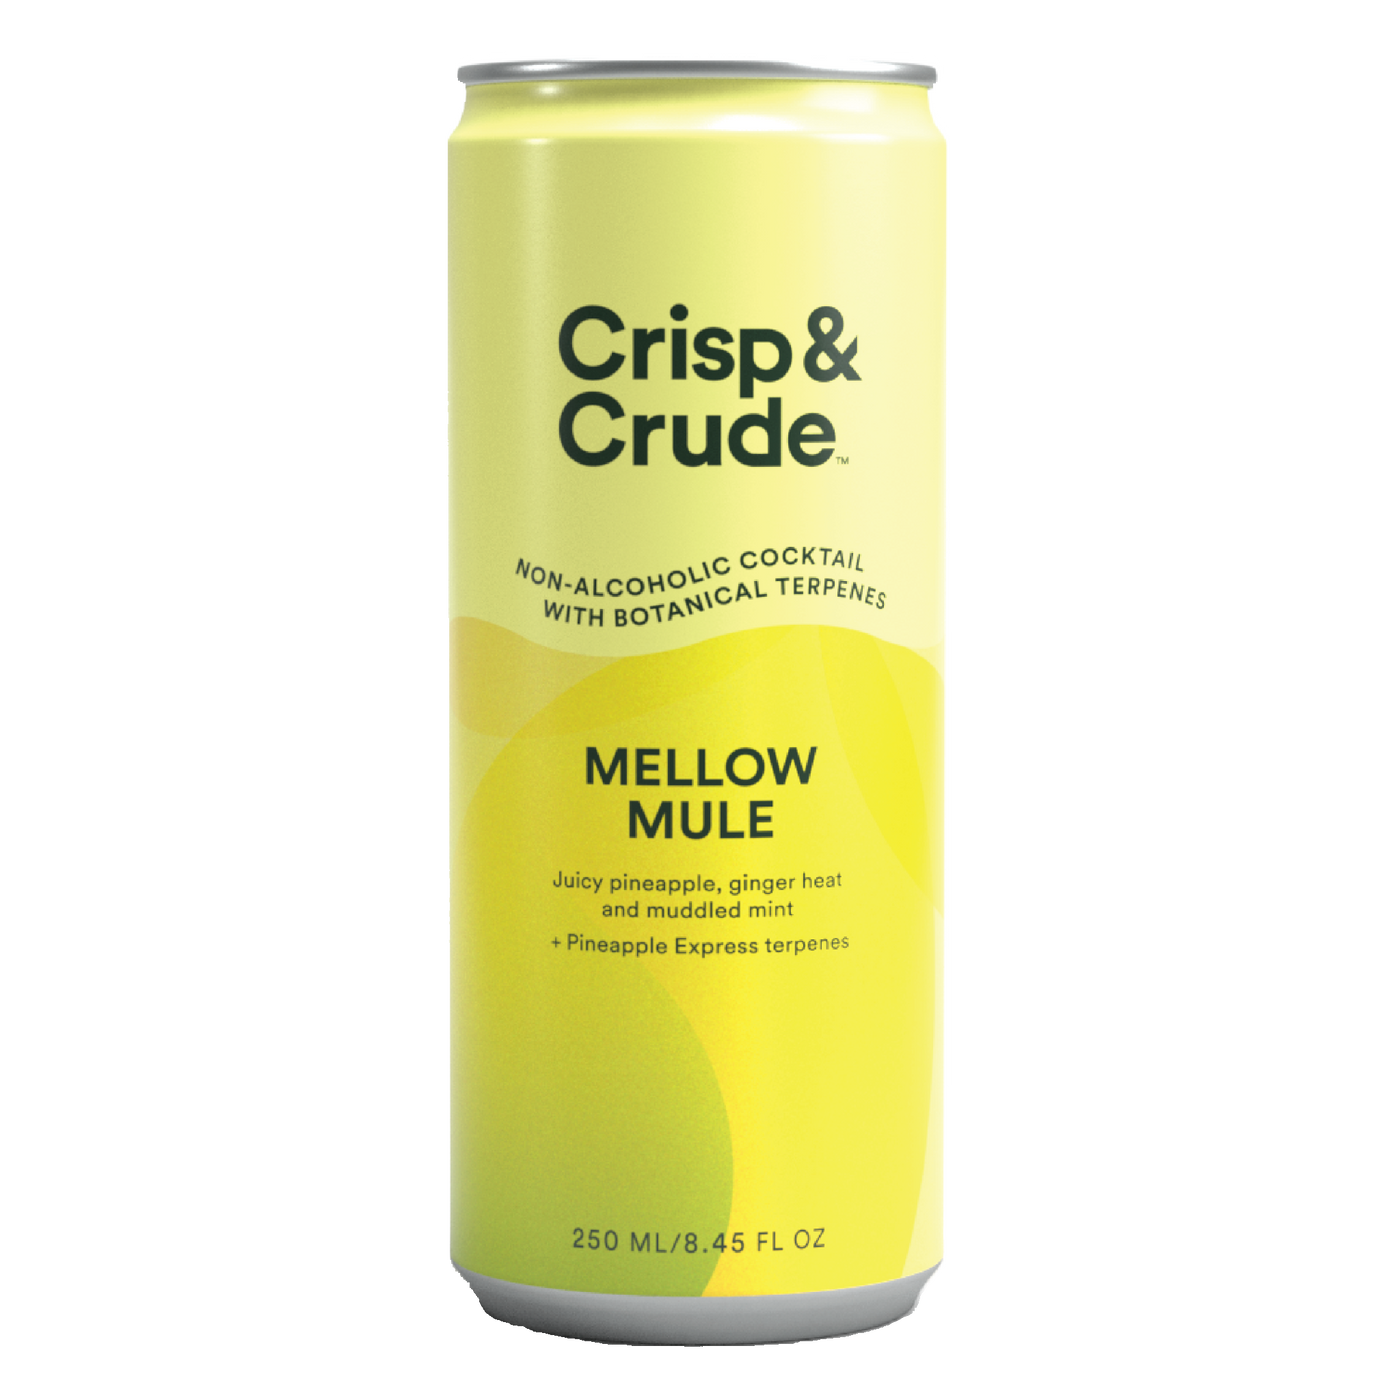 Crisp & Crude - Mellow Mule - Non Alcoholic mule Cocktail with Adaptogens Zero Alcohol Free - juicy pineapple, ginger heat and muddled mint with pineapple express terpenes